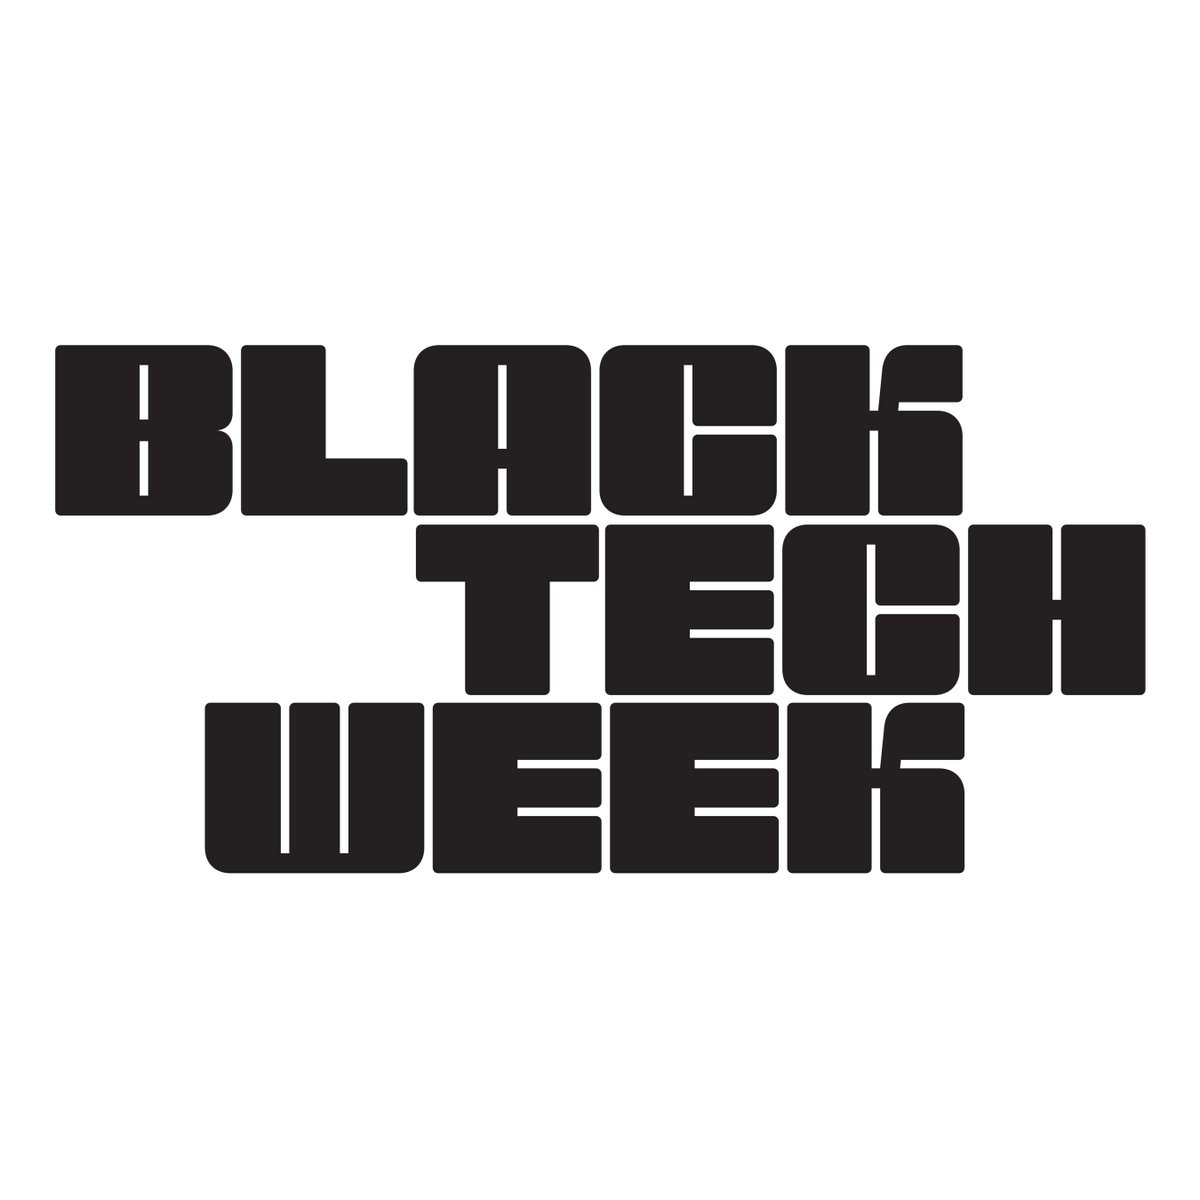 .@BlackTechWeek announces writer, producer, and entrepreneur @IssaRae as the first keynote speaker for its 2023 conference. fal.cn/3yVY9 

#BlackTech #Tech